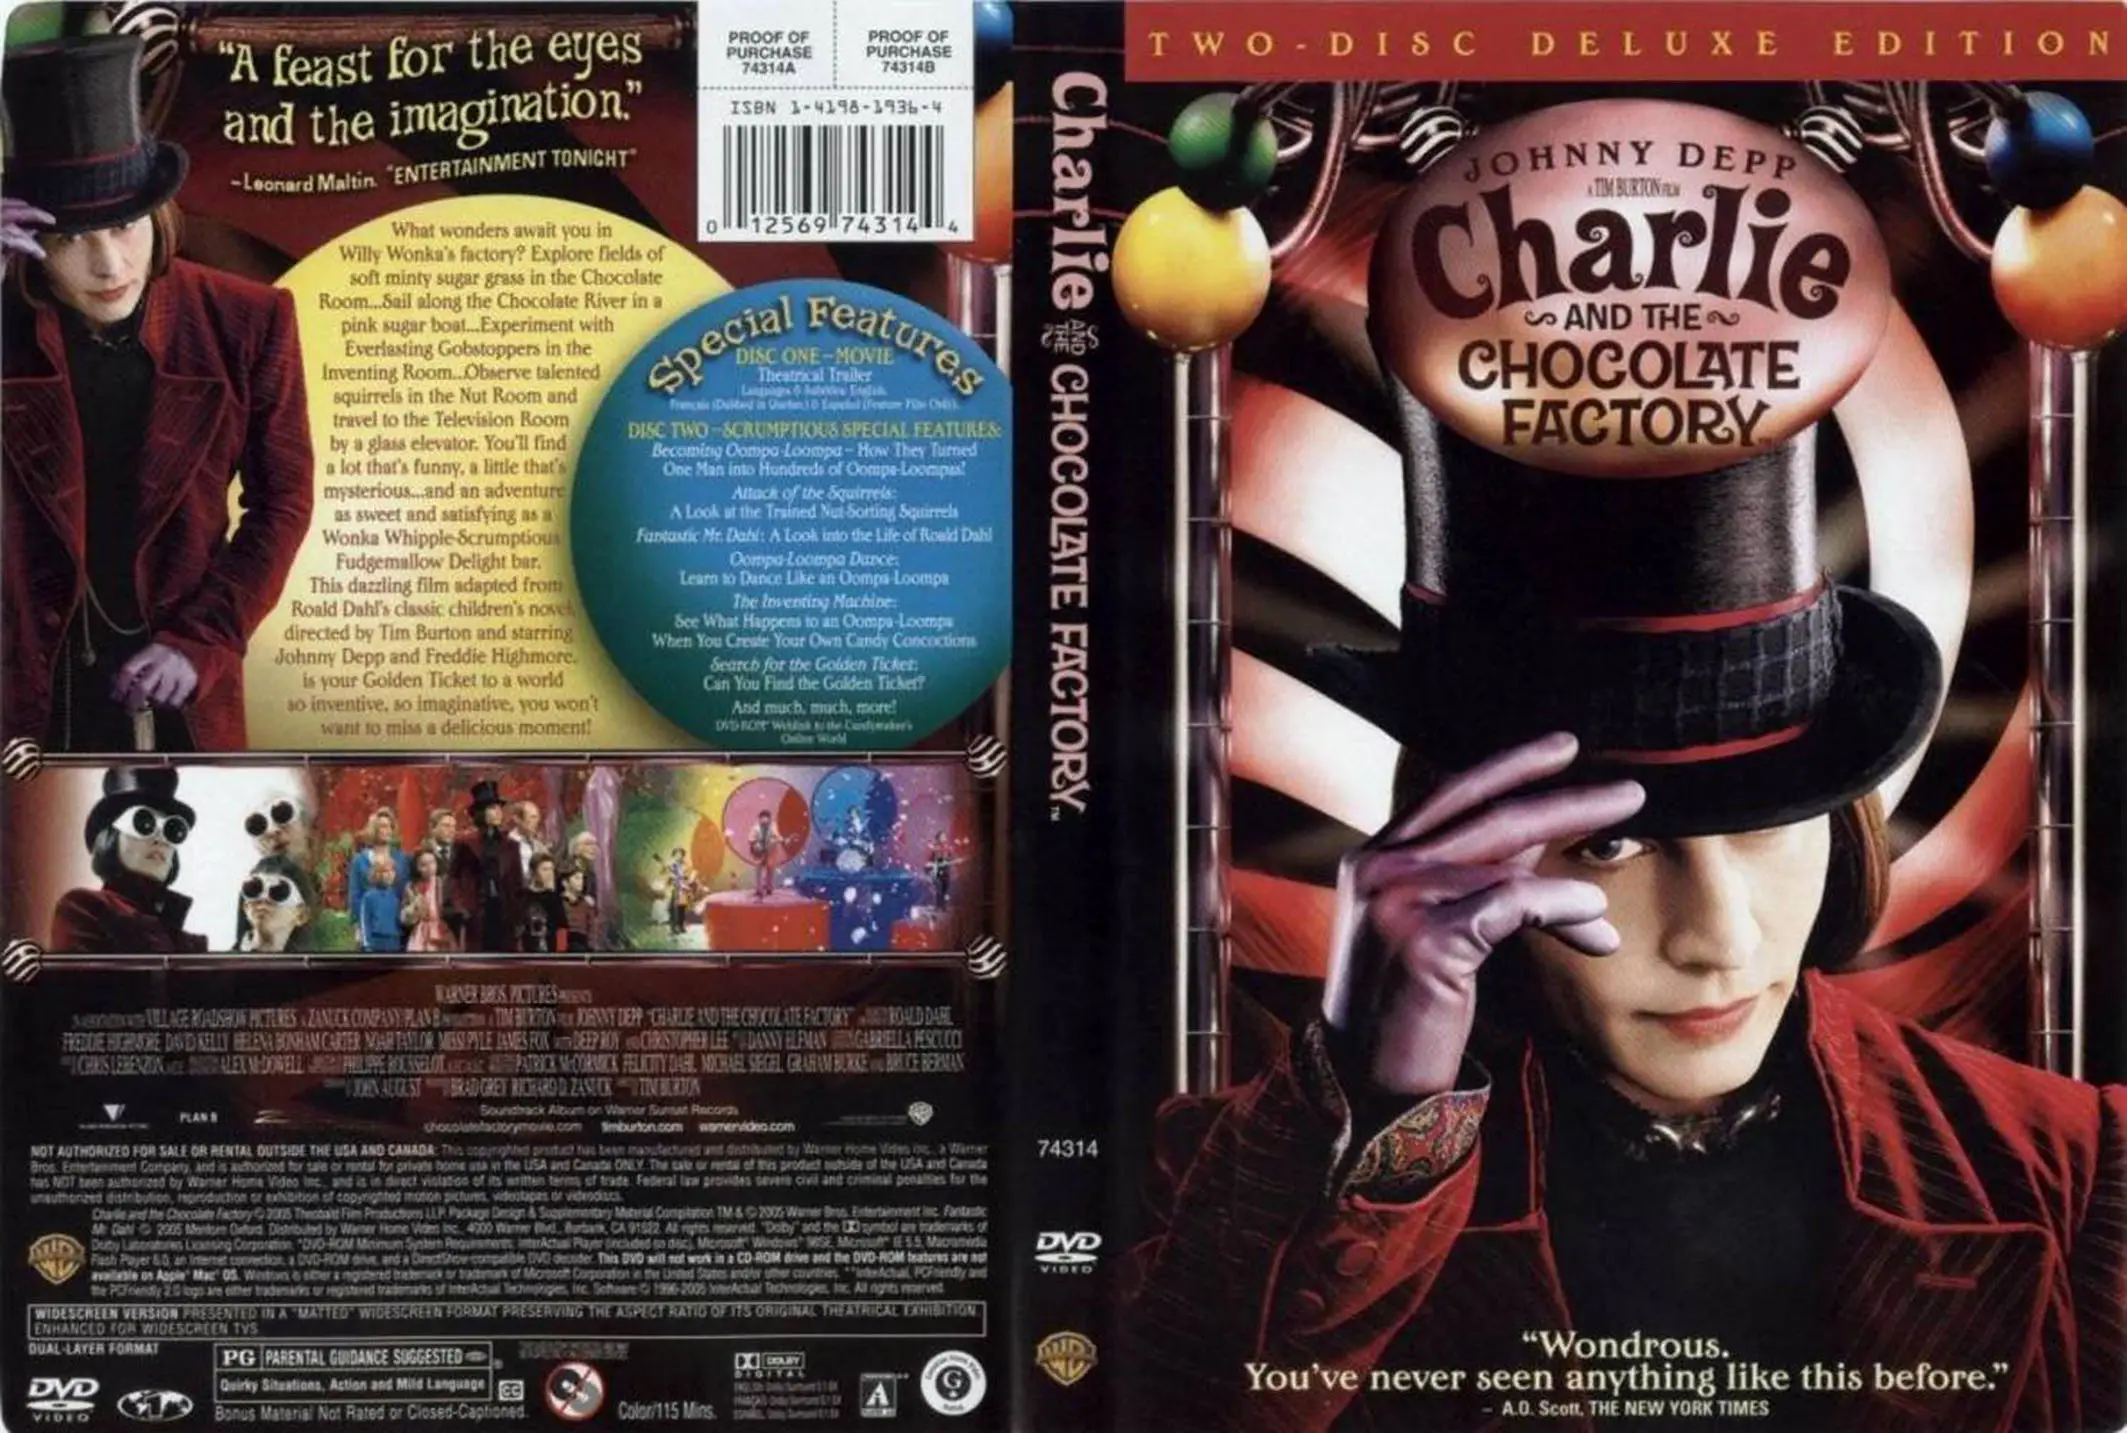 Charlie and the Chocolate Factory (2005) 2-Disc Deluxe Edition.